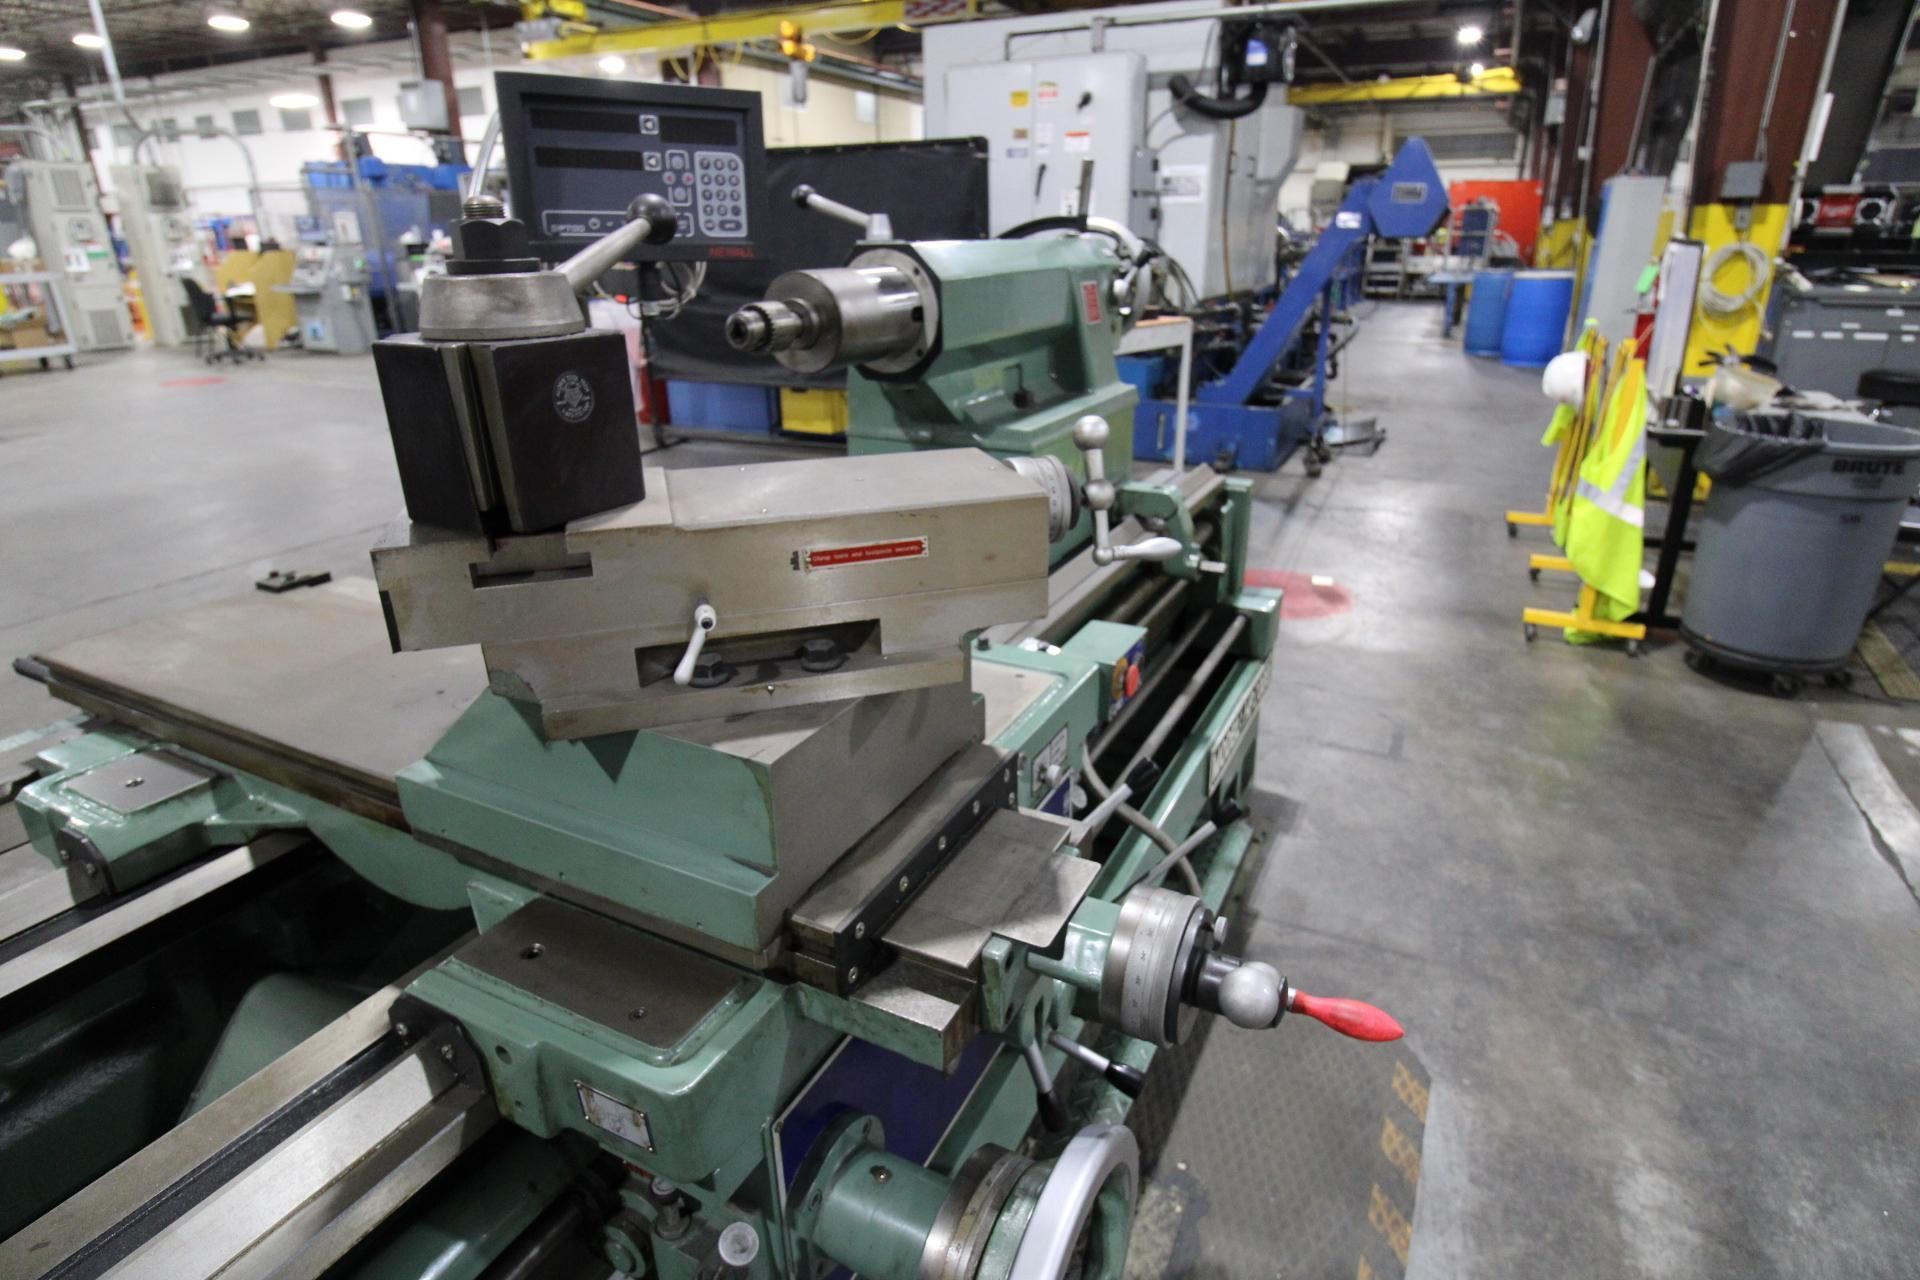 HOLLOW SPINDLE LATHE, KINGSTON HEAVY DUTY 34 HP-2000, new 2014, never used in production, 7-1/4" sp - Image 11 of 23